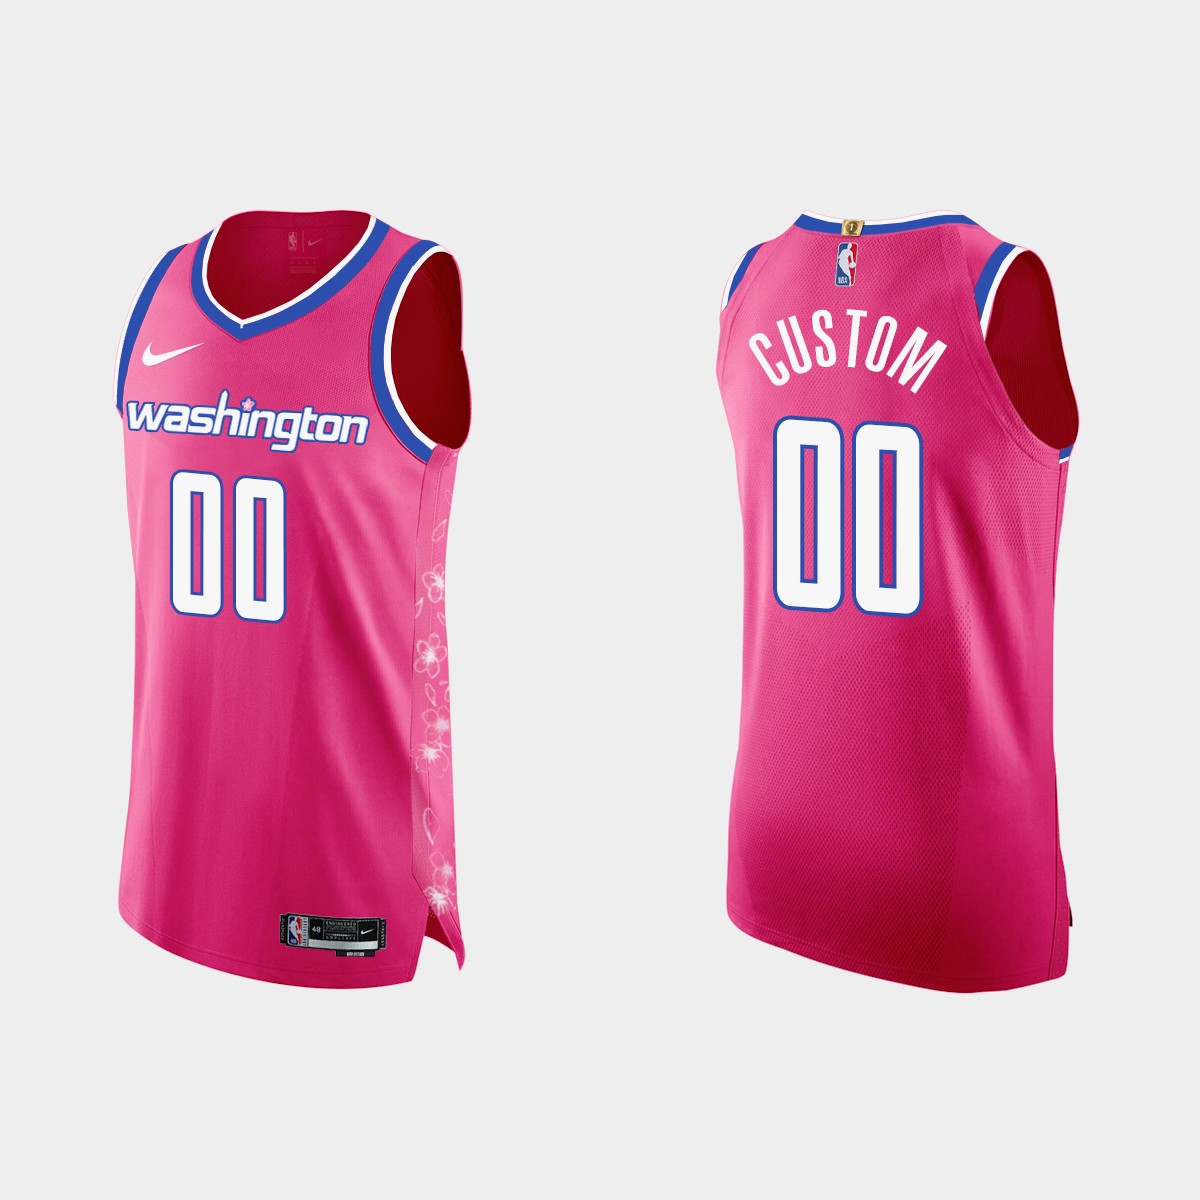 wizards cherry blossom jersey for sale